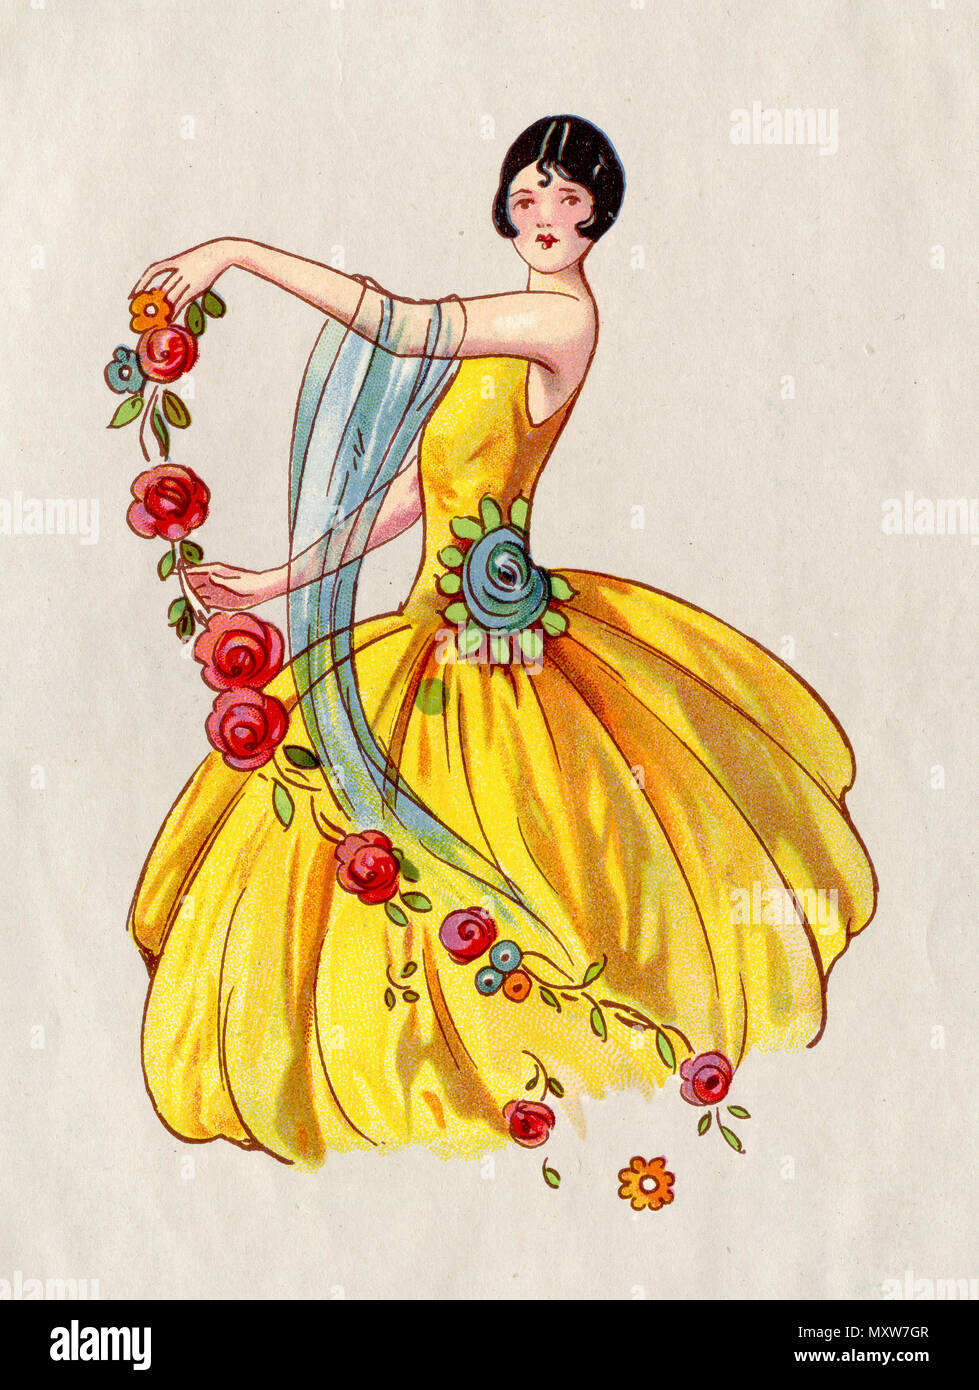 Dancer in a yellow dress with a bob, Stock Photo